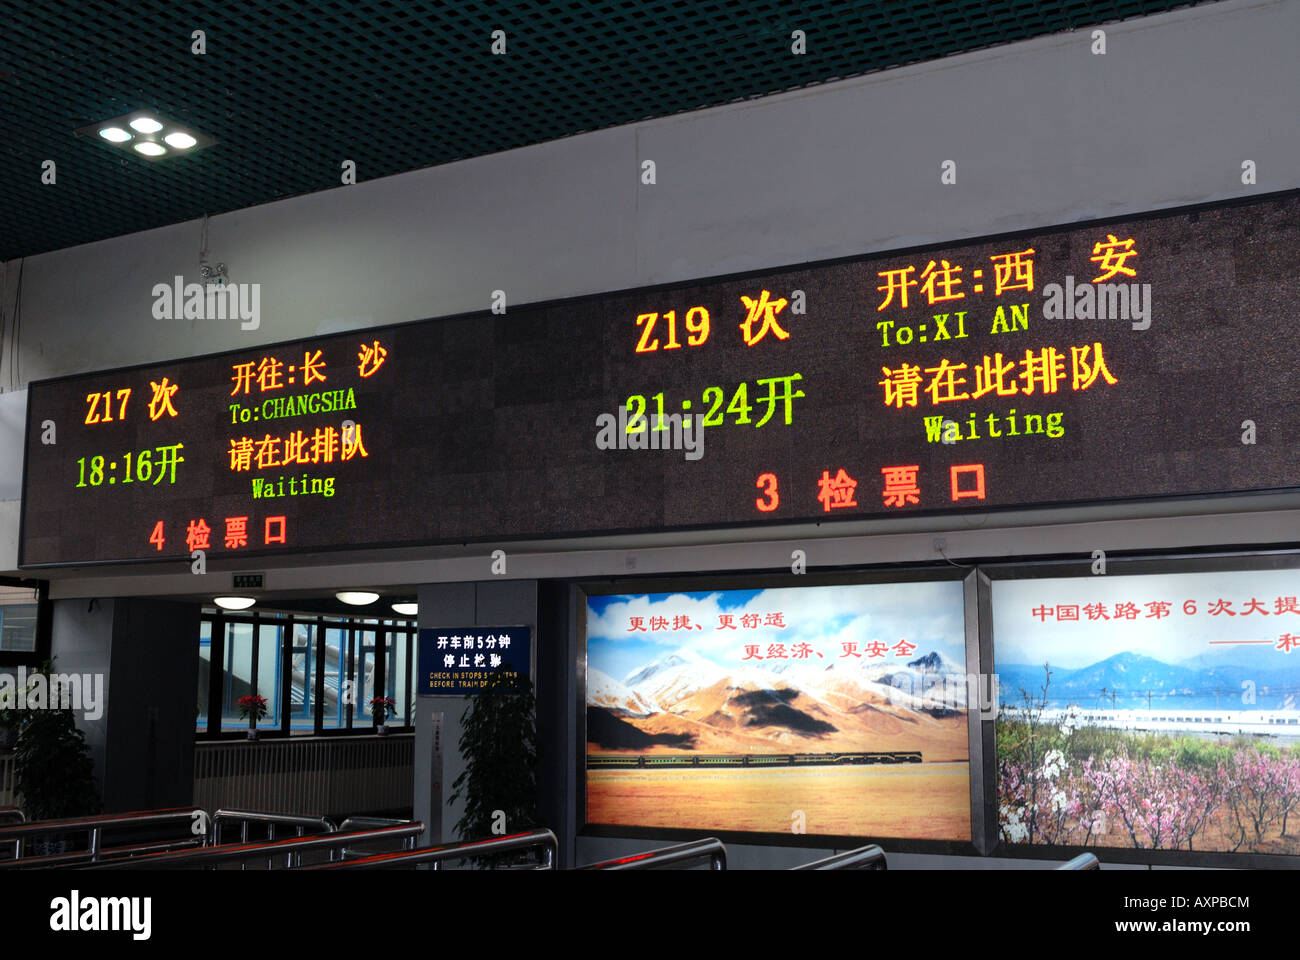 Electronic digital platform departure boards for the trains Z17 on platform 3 to Changsha and train Z19 on platform 4 to XI AN Stock Photo